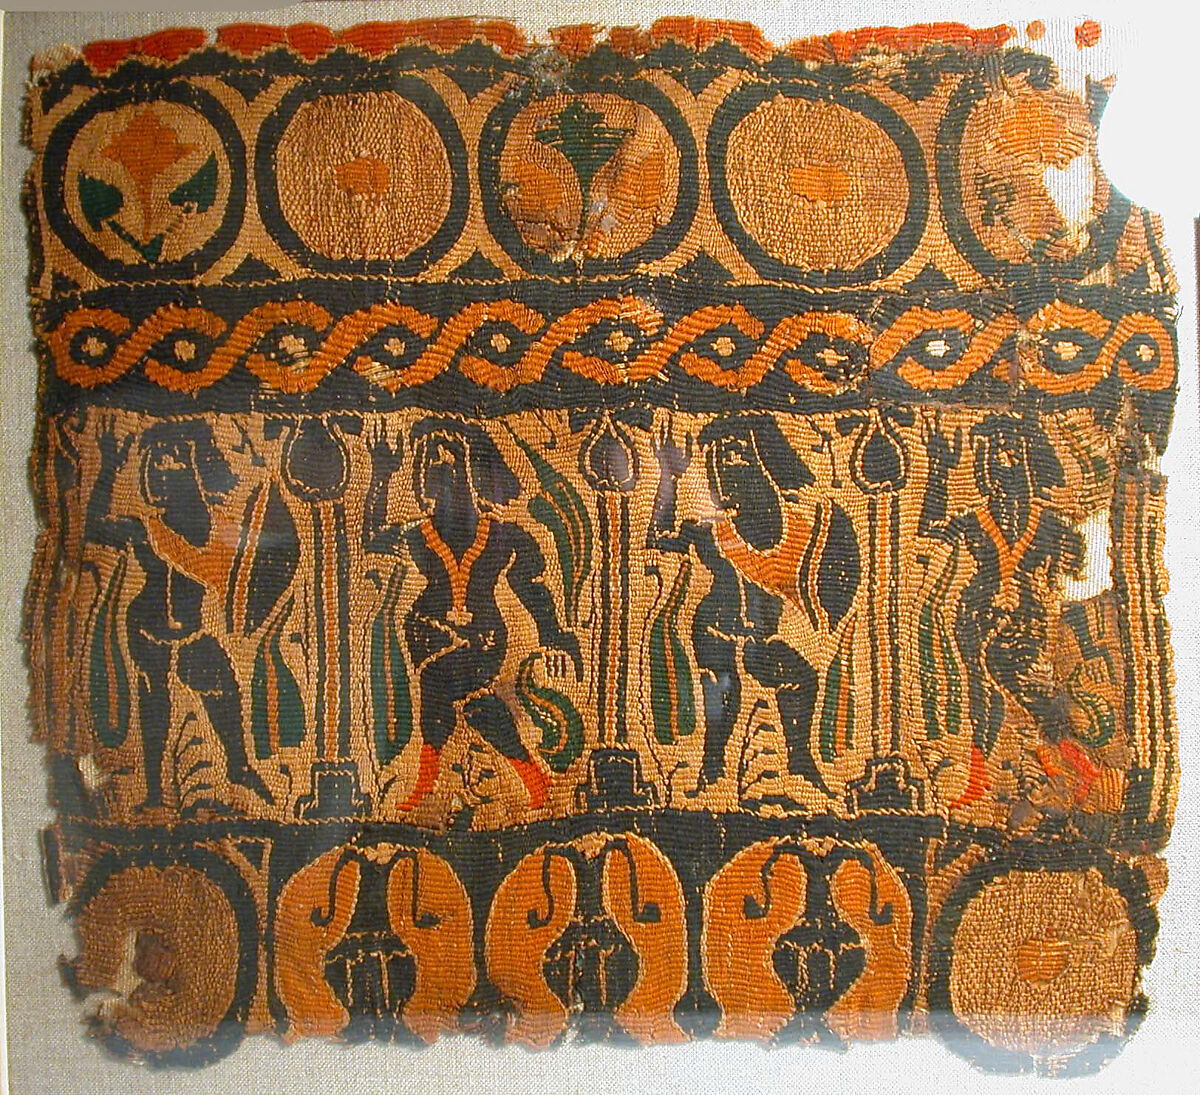 Four standing figures in an arcade, Tapestry weave, linen, polychrome wool, Early Byzantine